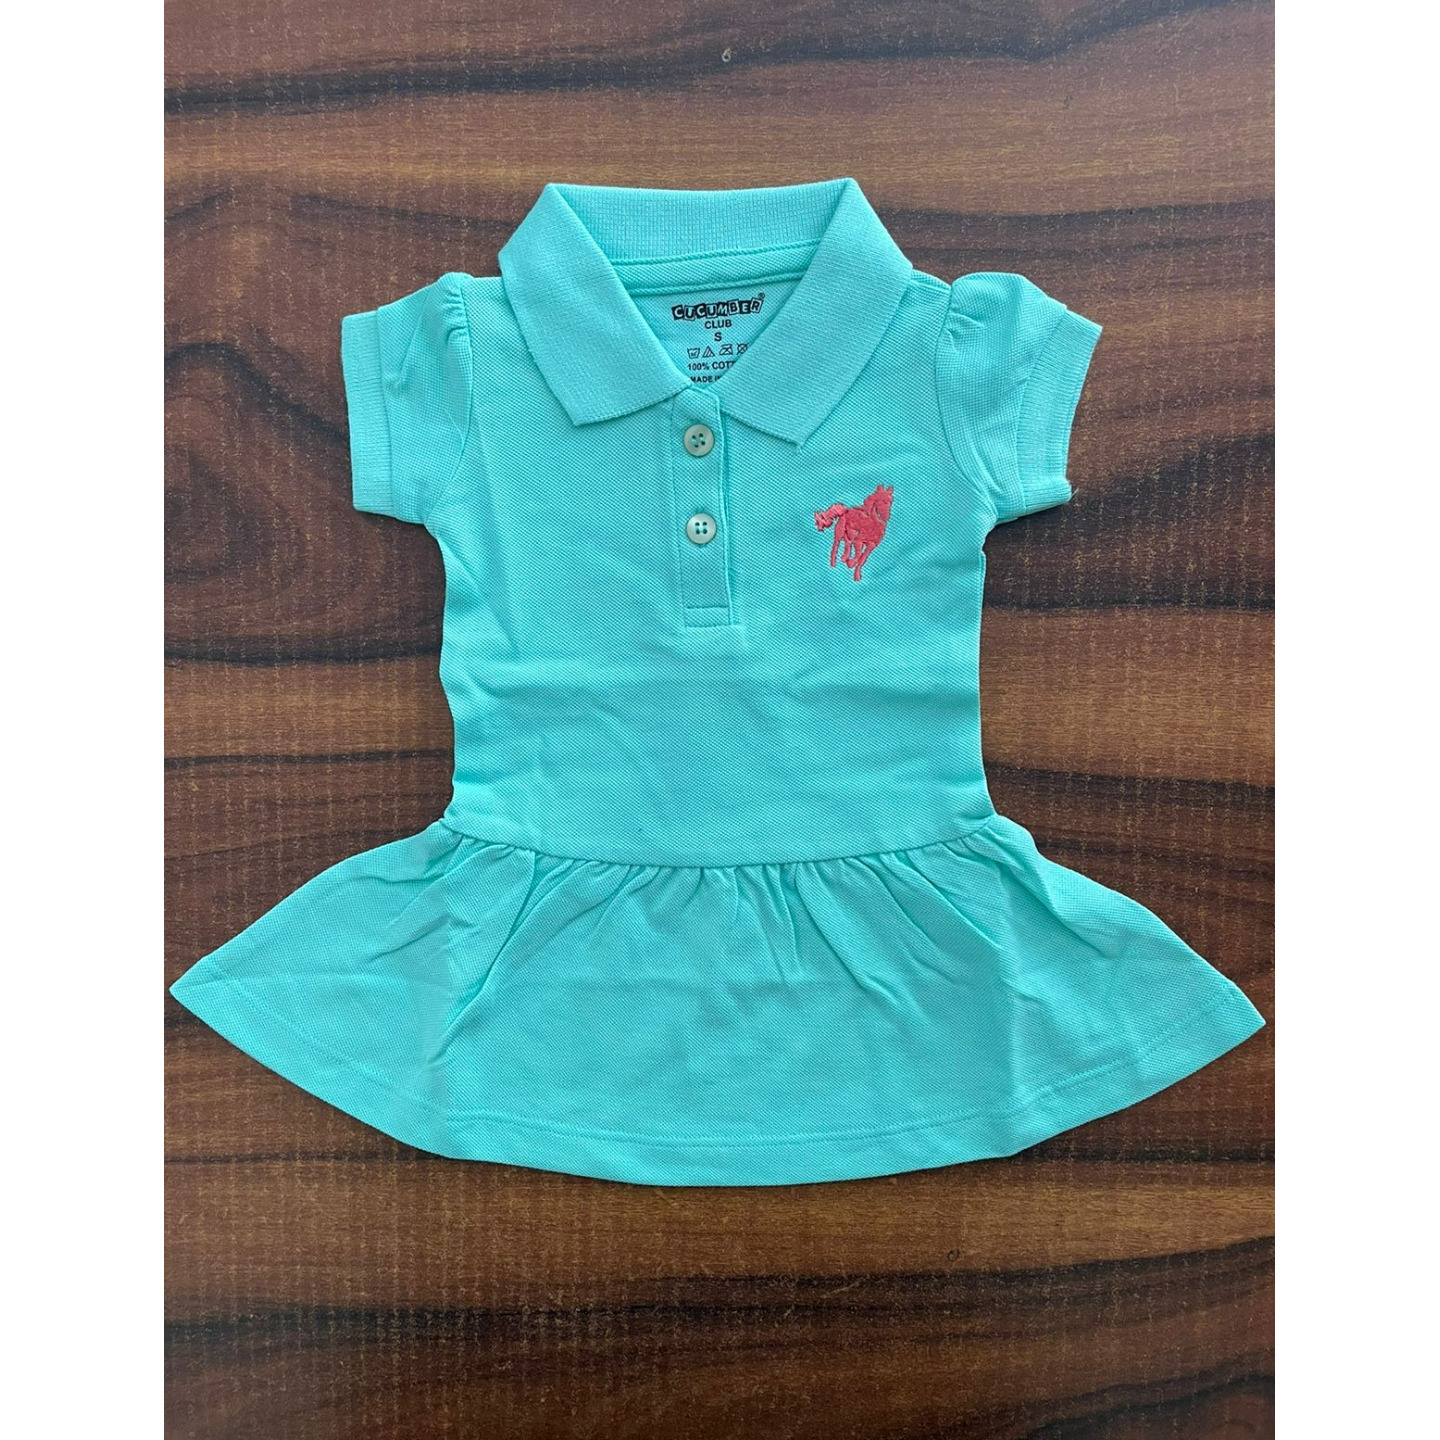 Cucumber Half Sleeves Collar Frock Rs 250 only Small Size 0 to 6 Months